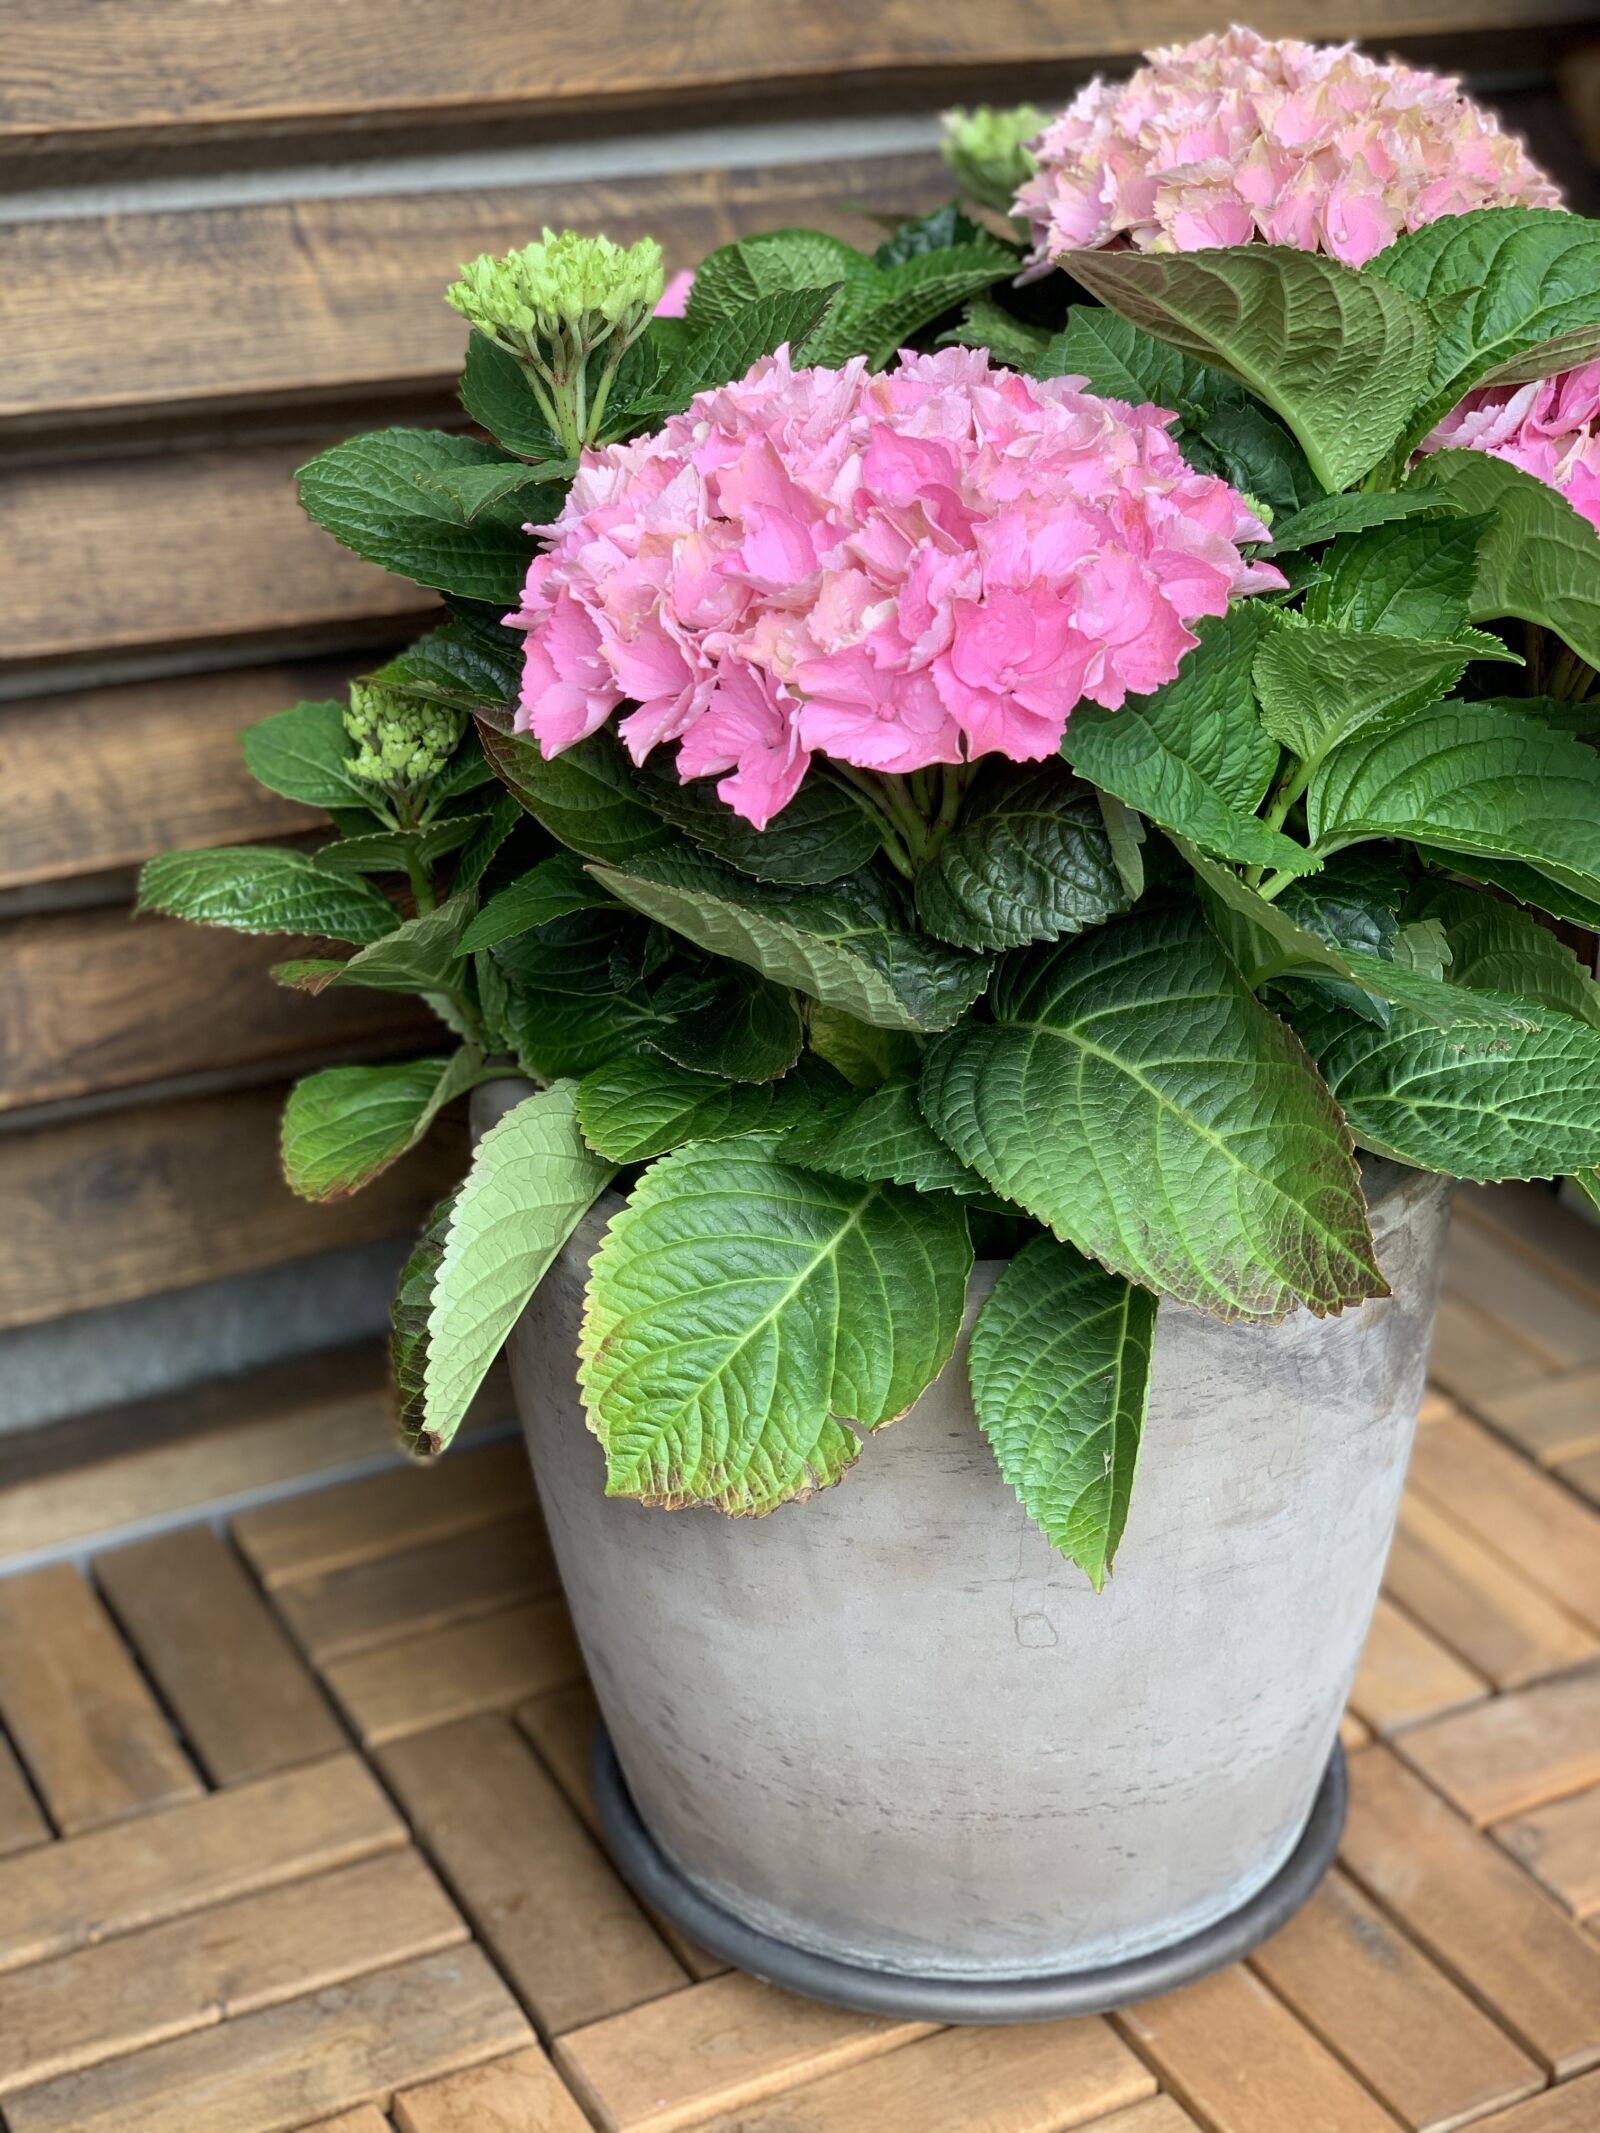 iPhone XS back dual camera 6mm f/2.4 sample photo. Flower, nature, garden photography